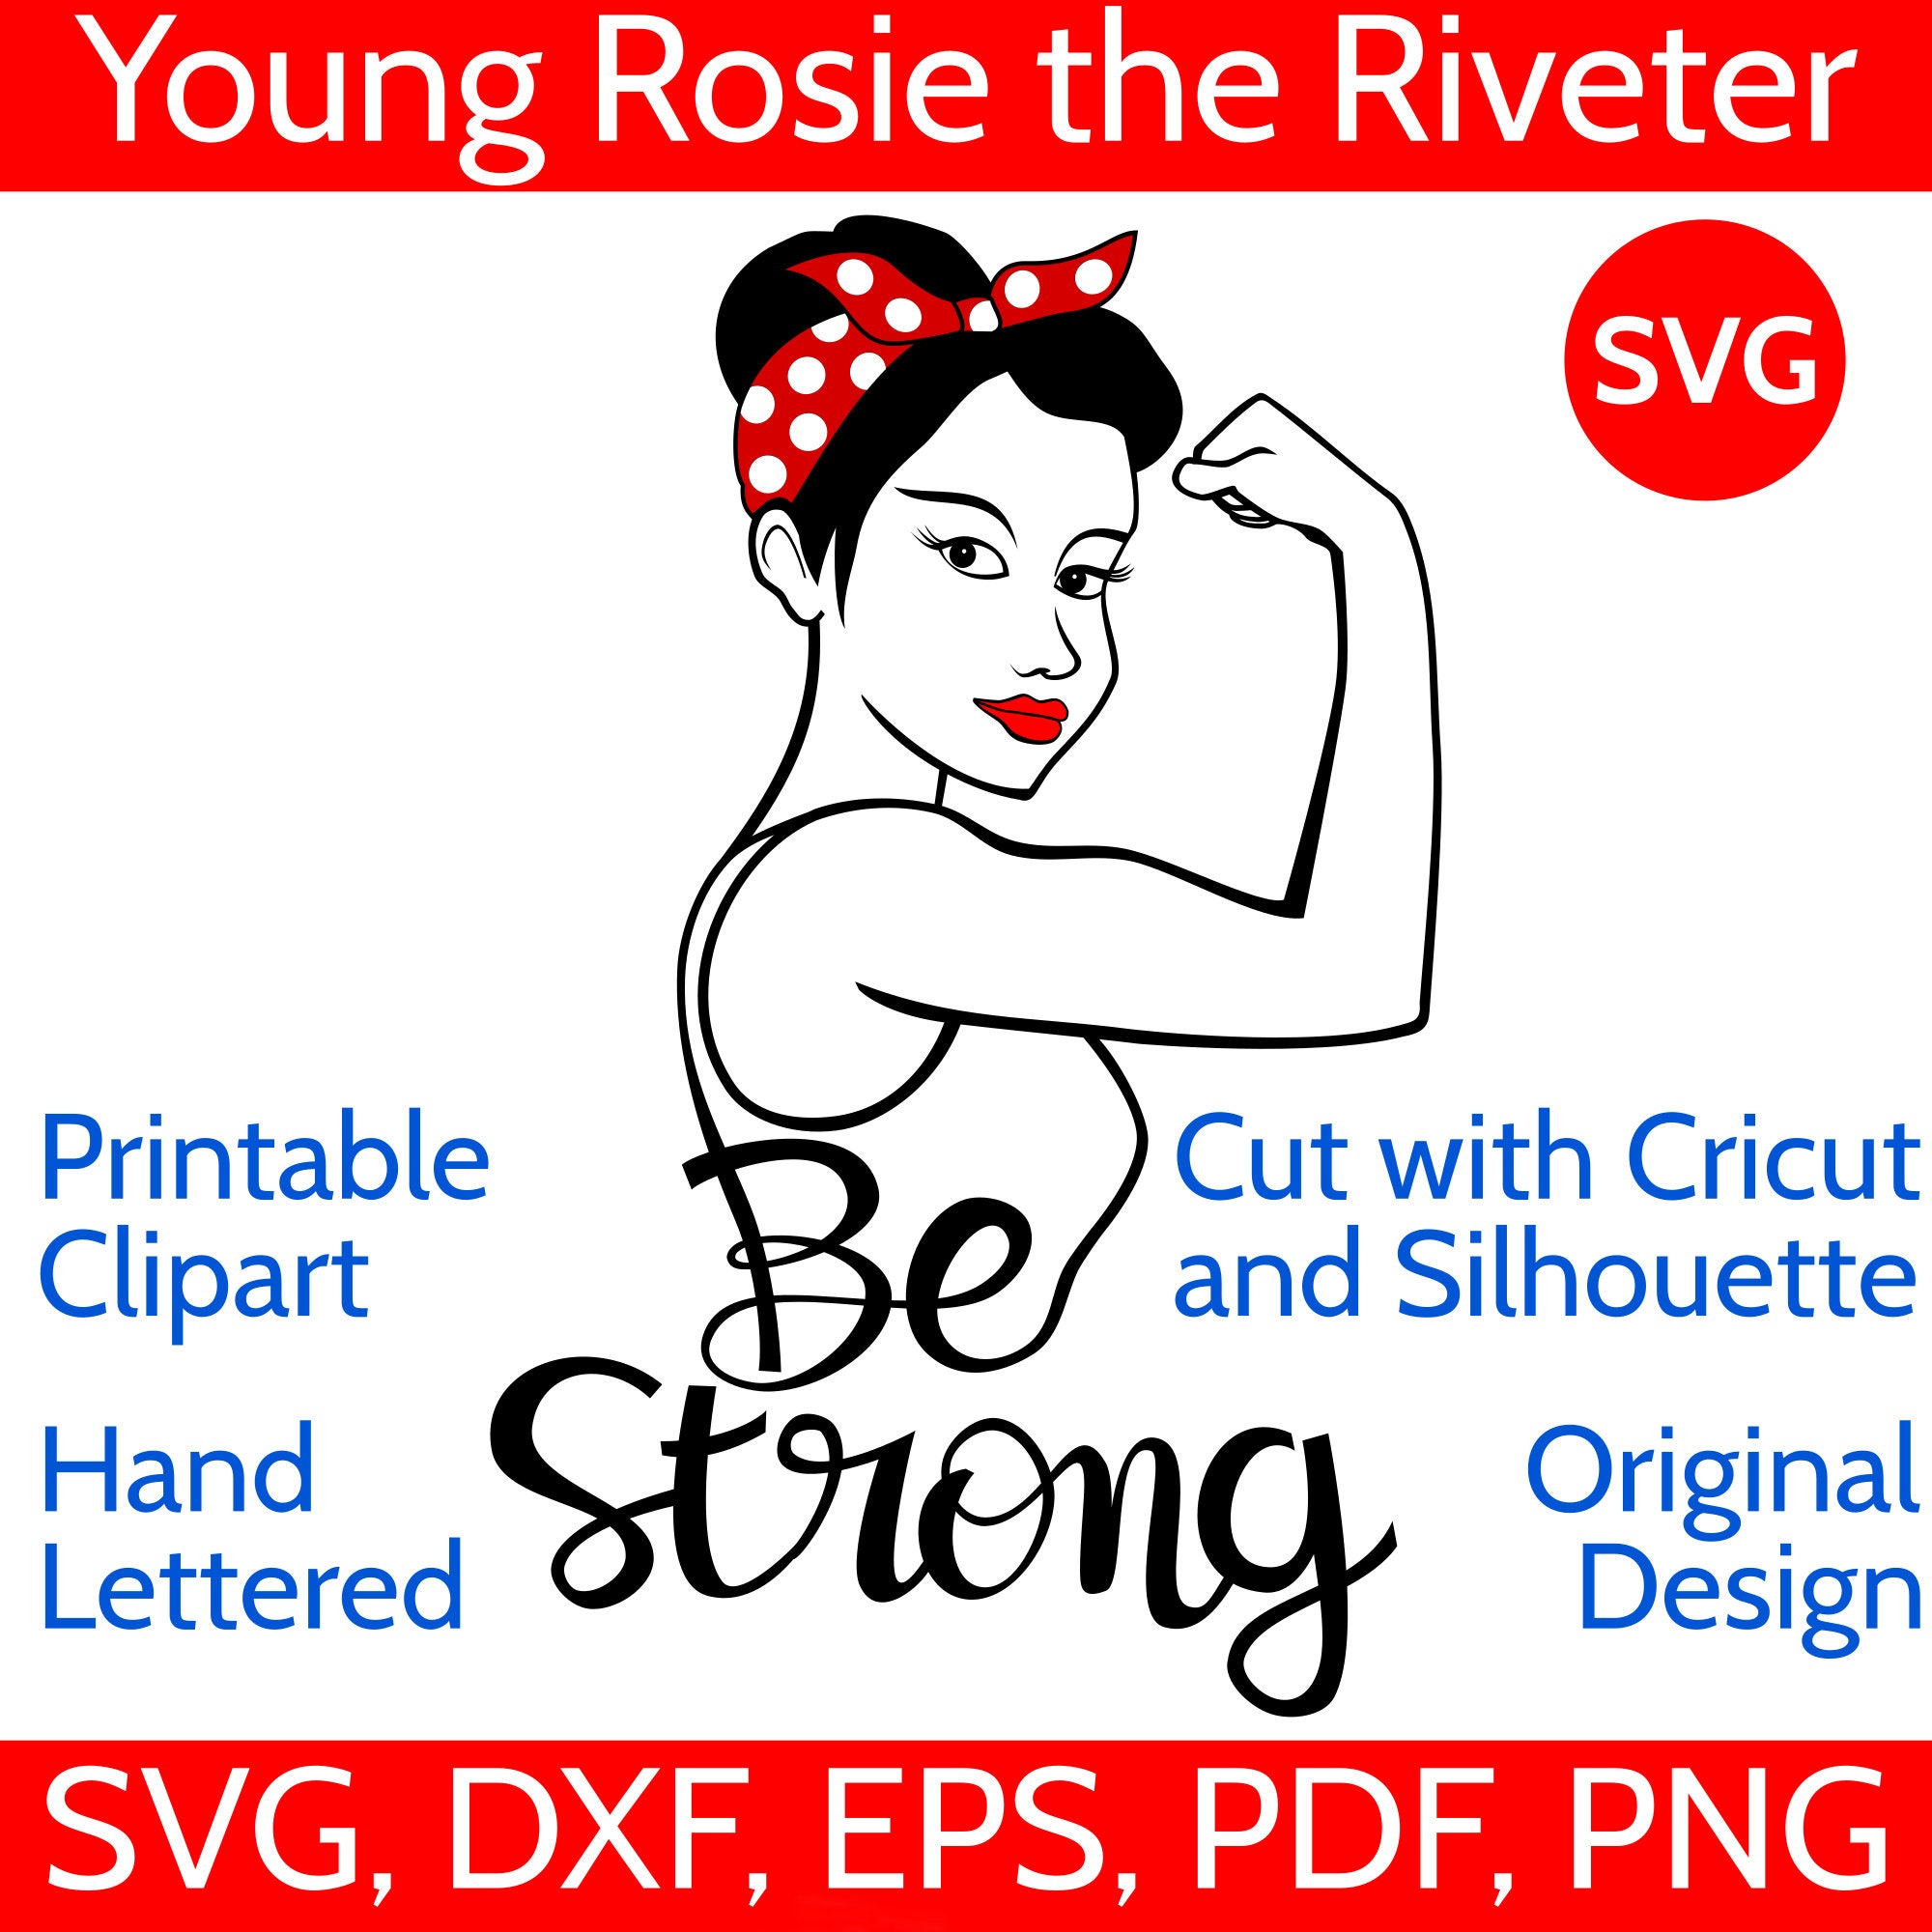 Download Young Rosie the Riveter clipart and Be Strong SVG File for ...